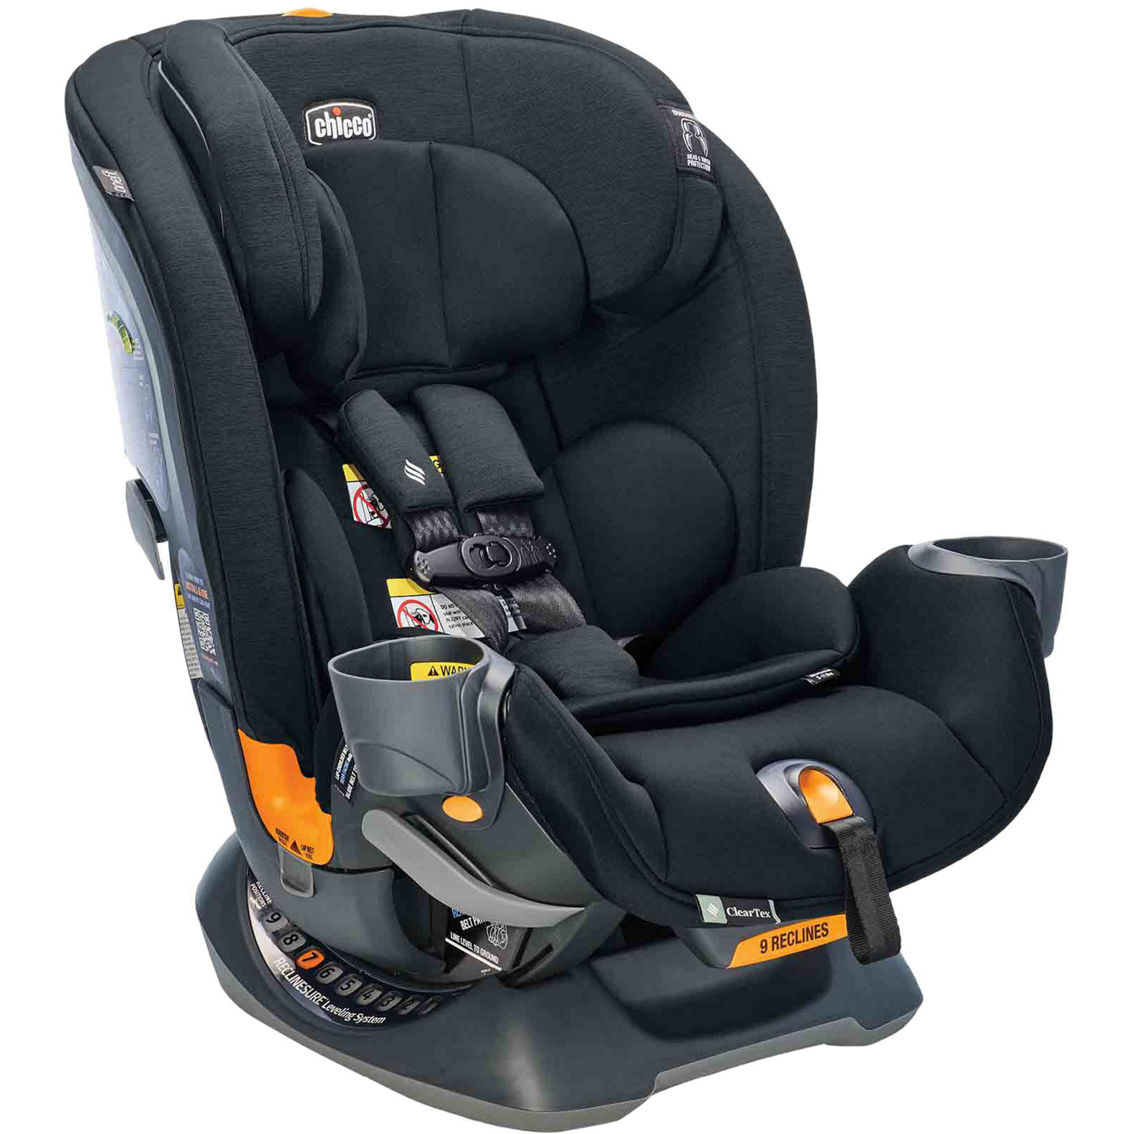 Chicco OneFit ClearTex All-in-One Car Seat - Image 3 of 7